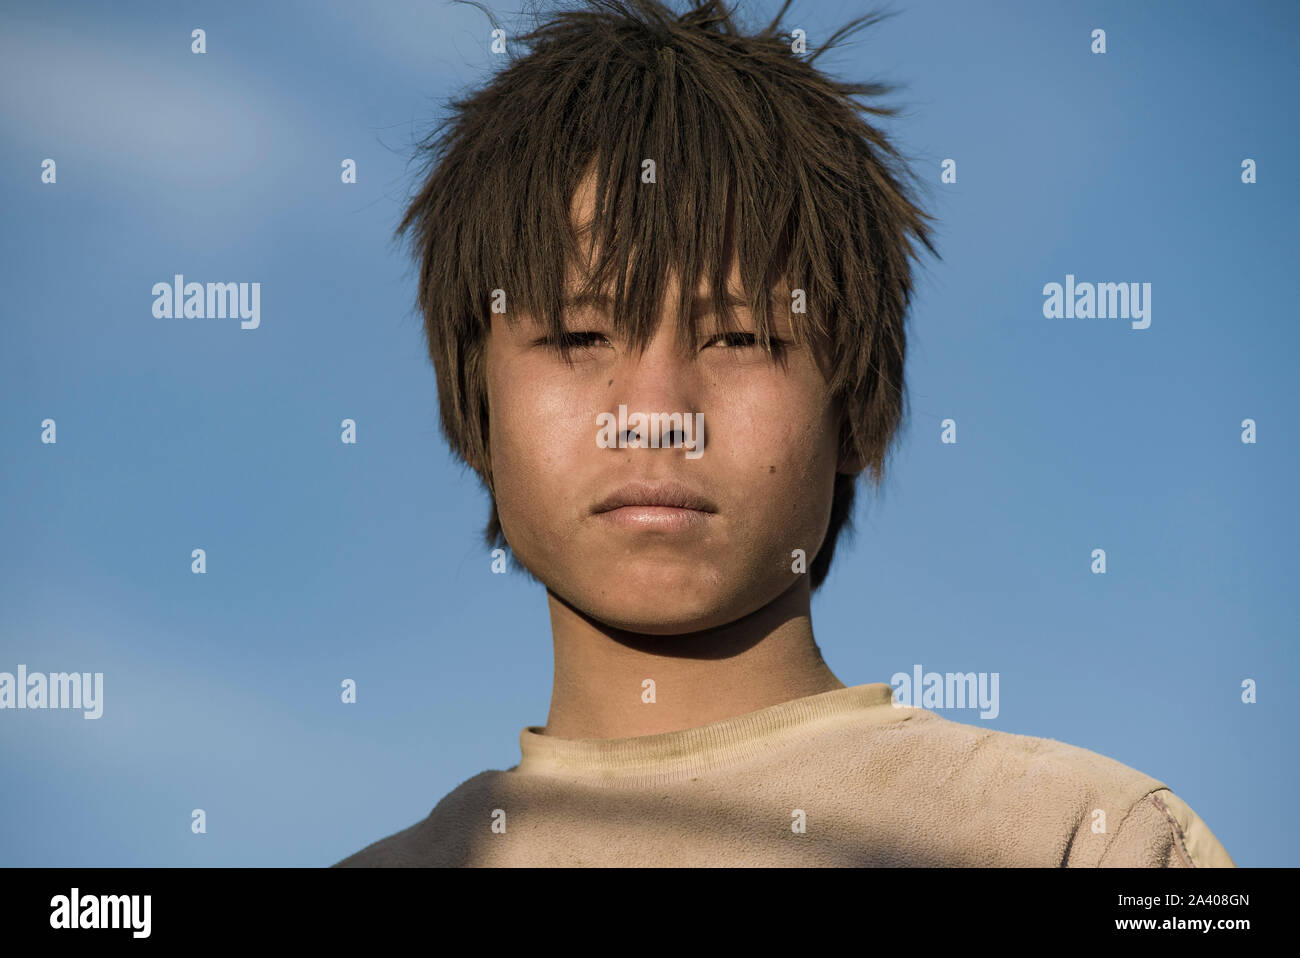 Leh, Jammu and Kashmir, India - July 27, 2011: Portrait of a Leh boy  looking like anime characters on sunny day under bluish sky background  Stock Photo - Alamy